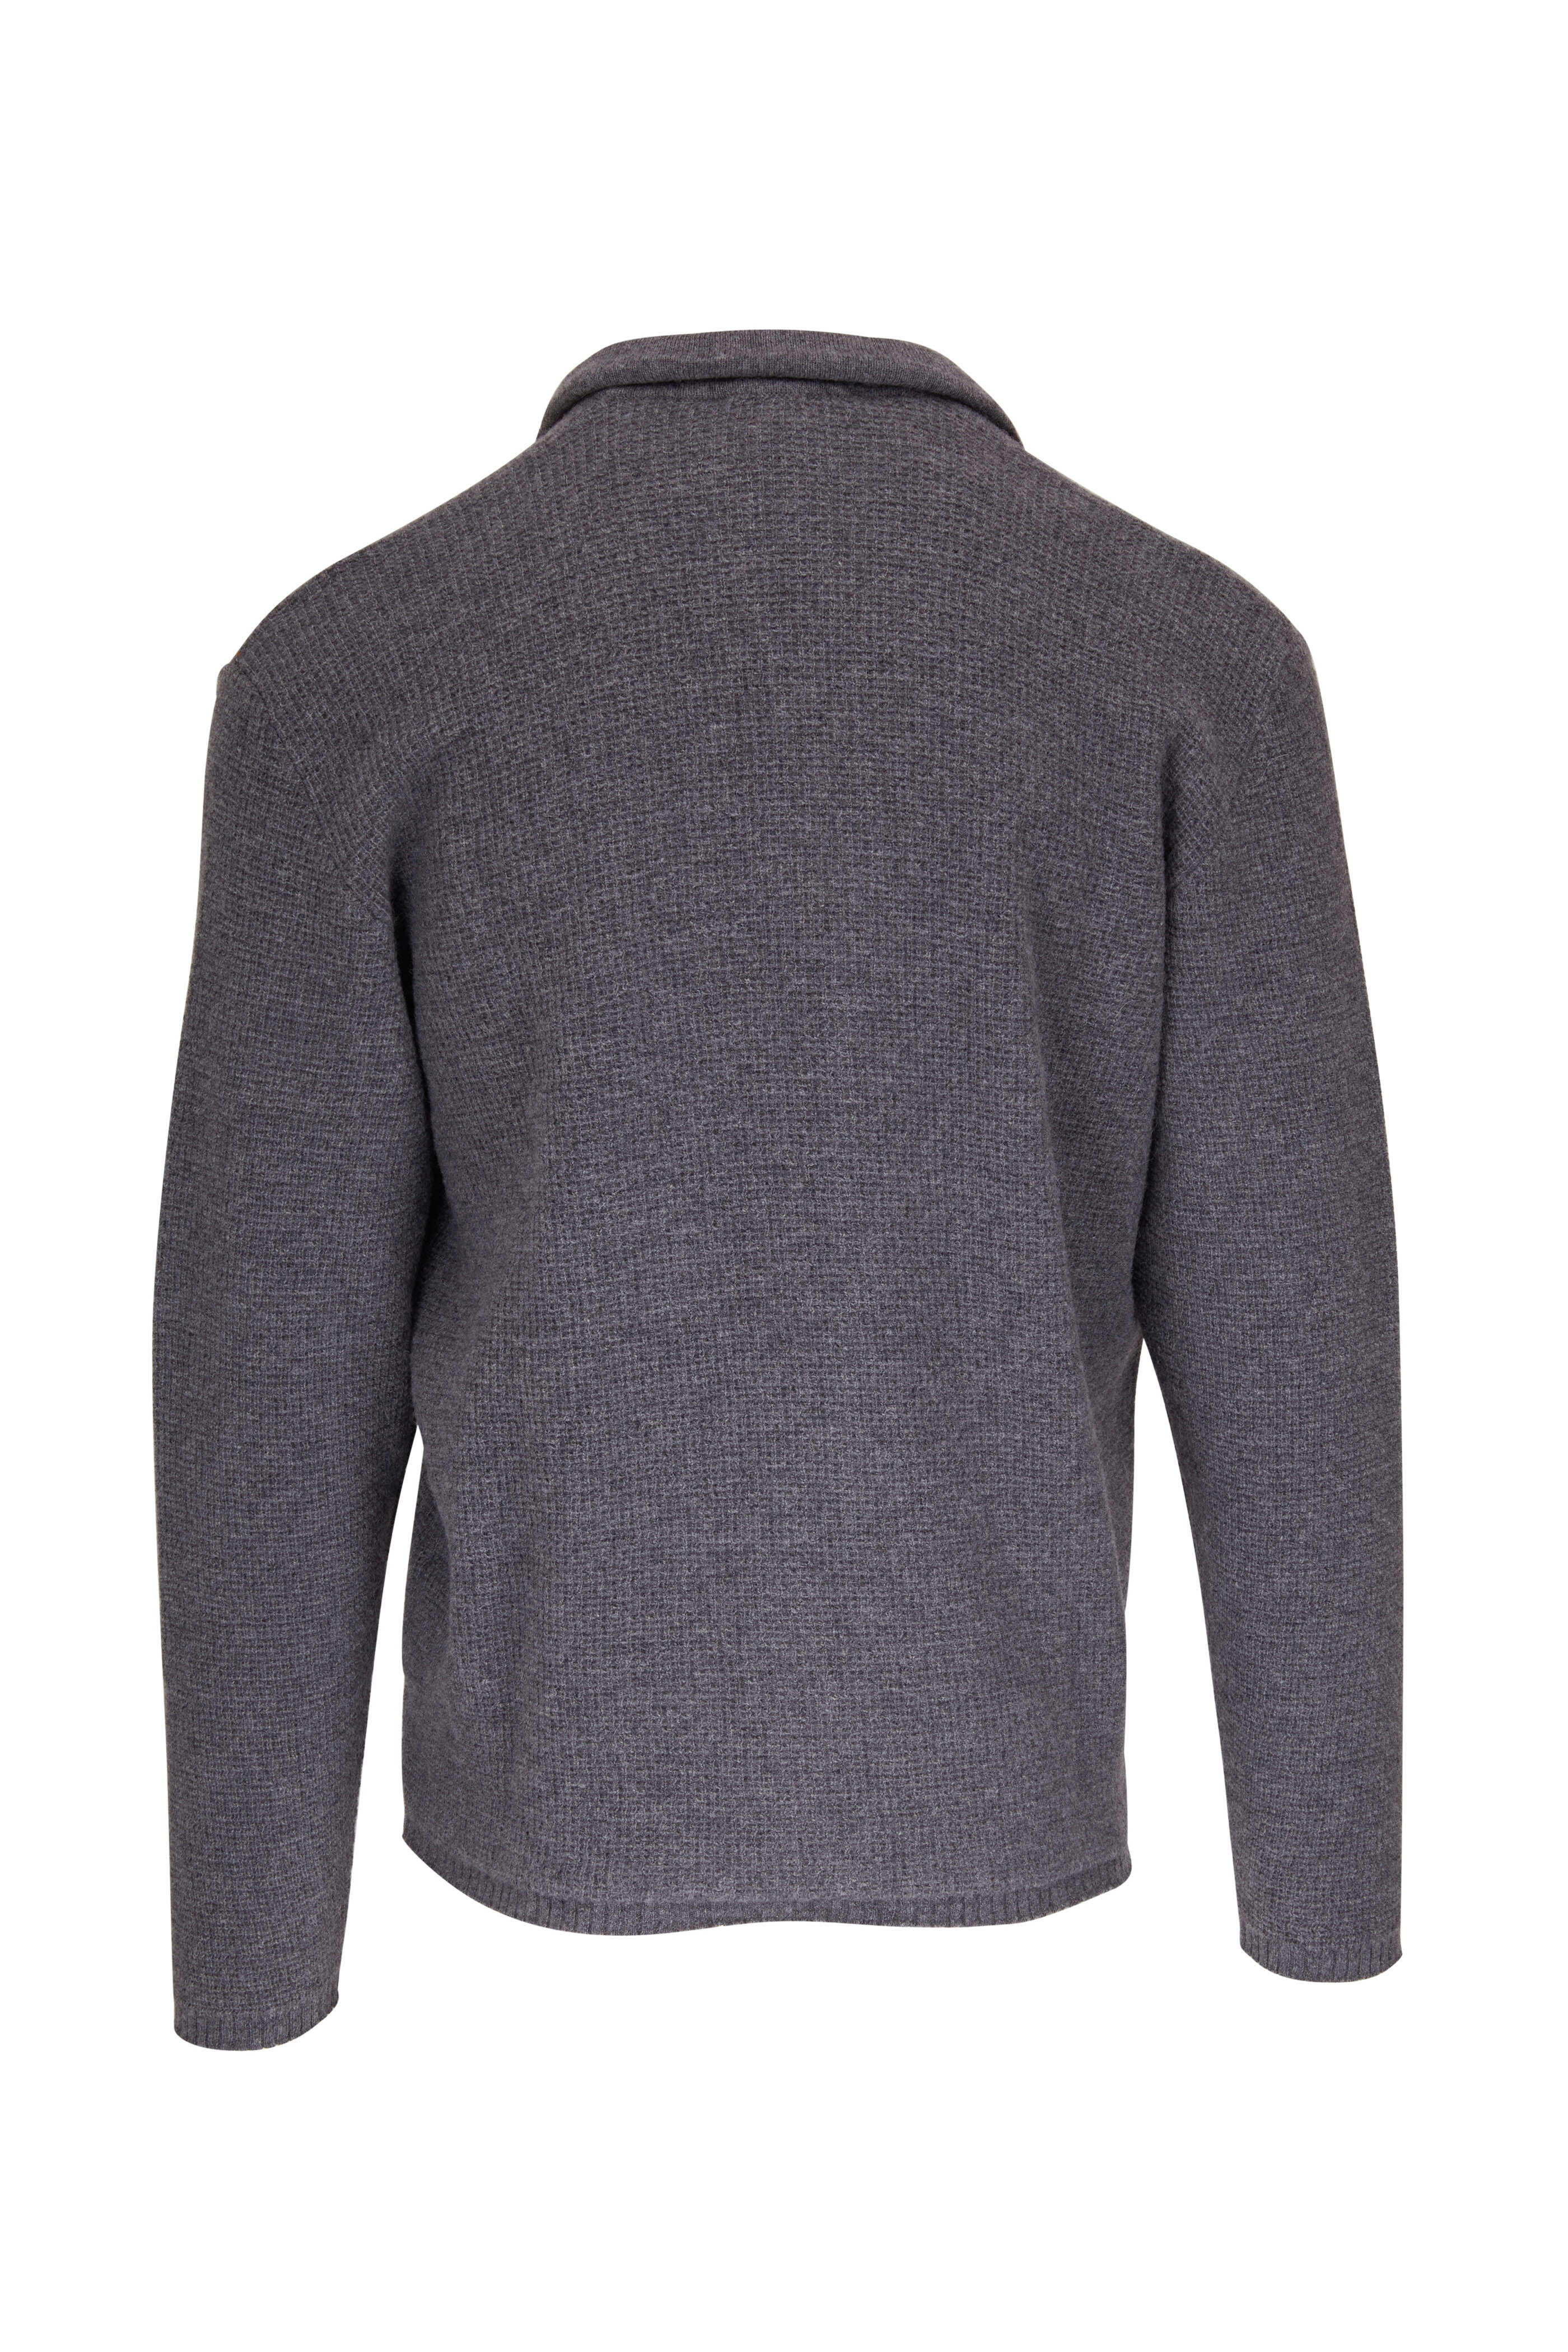 Crossley - Solid Gray Microwaffle Full Zip | Mitchell Stores